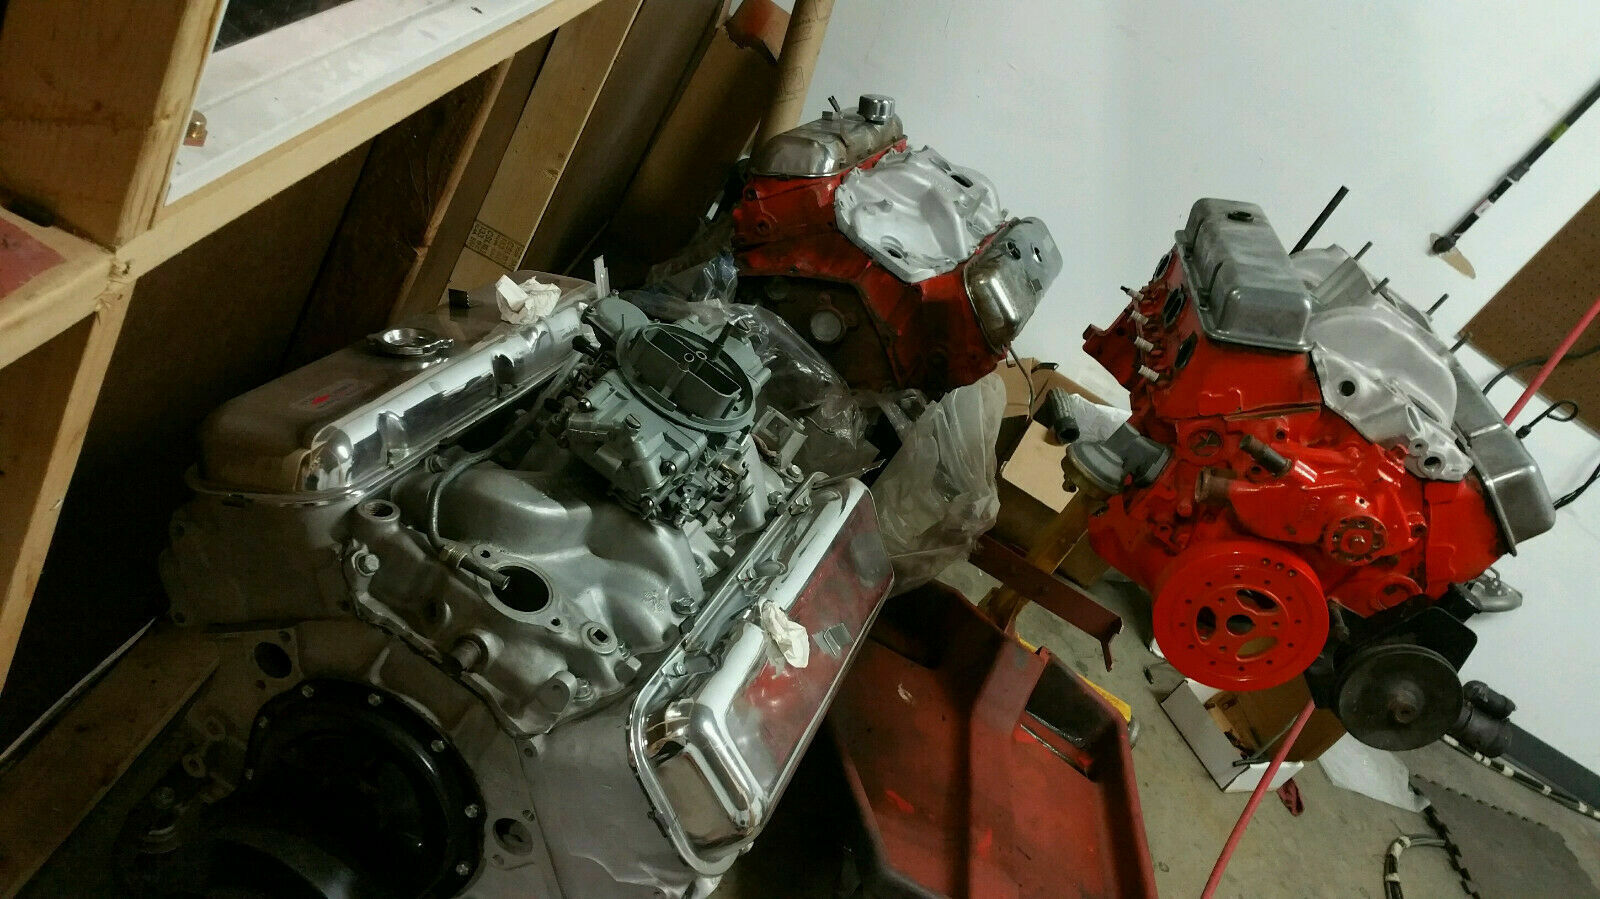 VINTAGE CHEVY SPEEDSHOP BLOWOUT ENGINE SALE (SPECIAL OR RARE BIG & SMALL BLOCK)